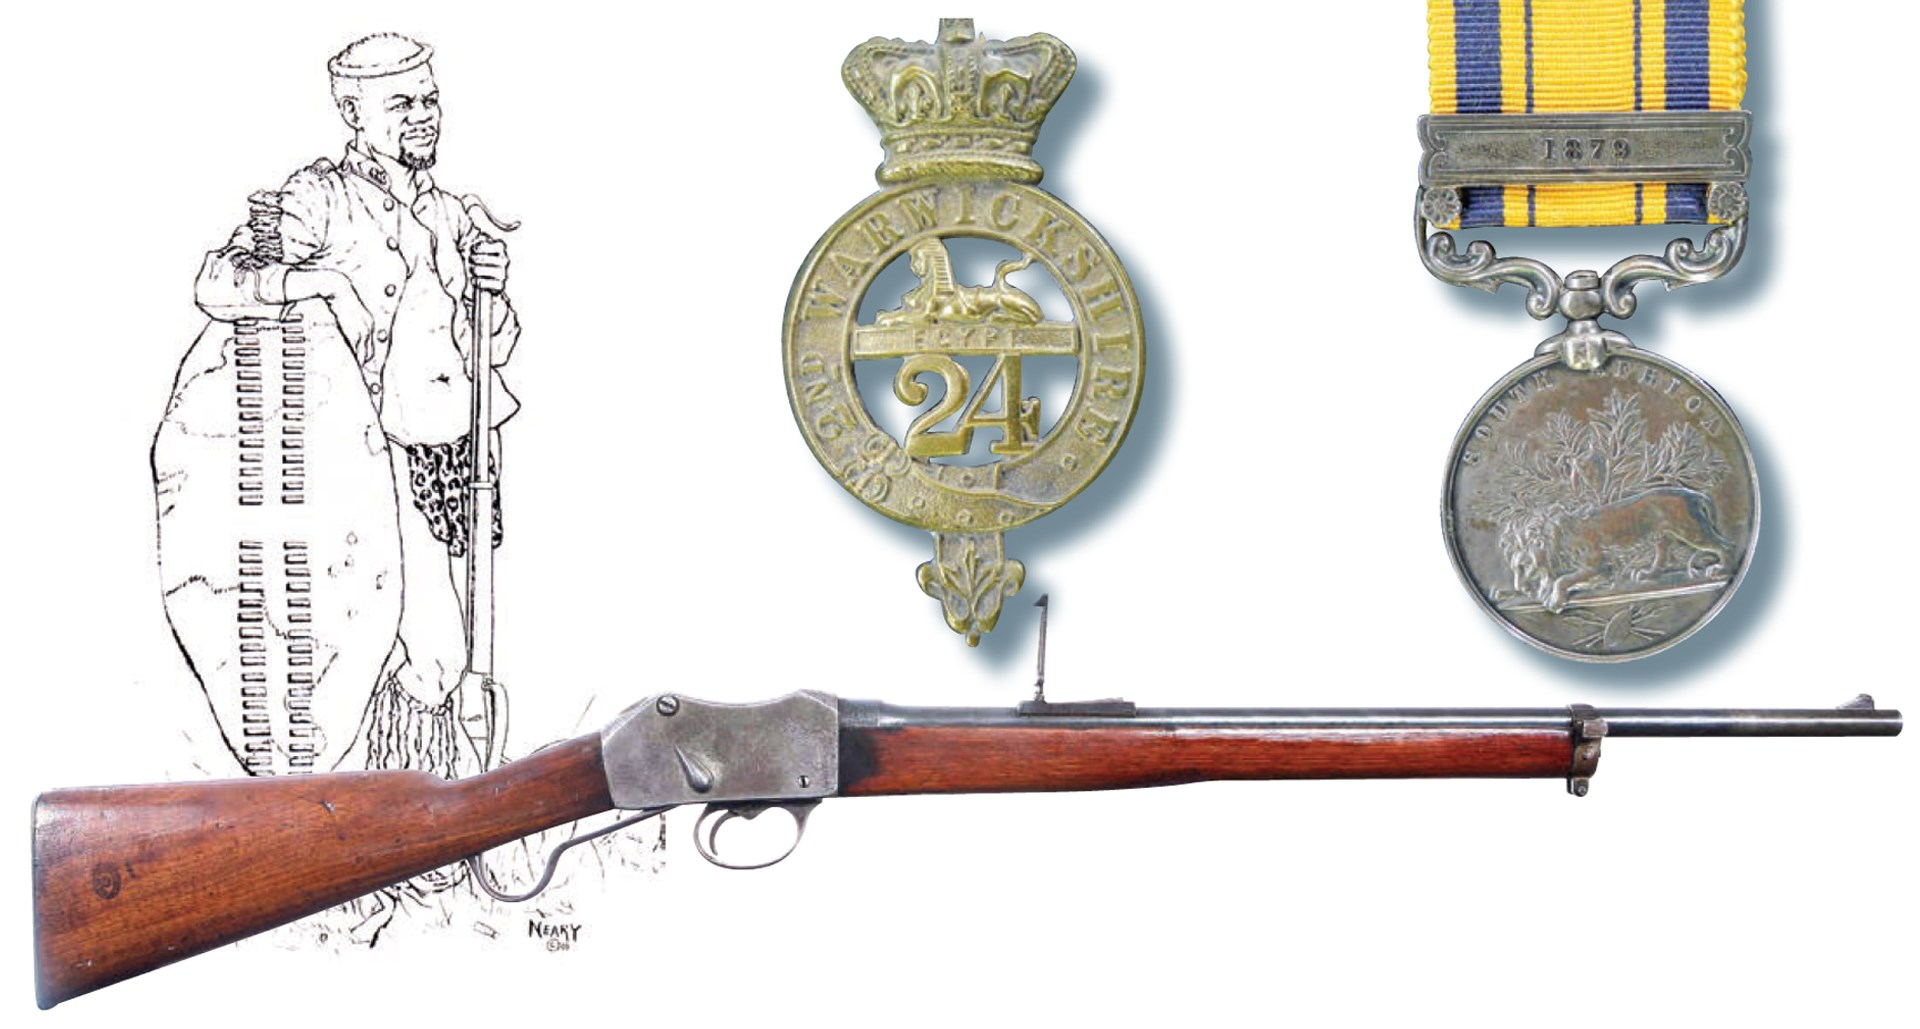 zulu warrior left side drawing compilation martini-henry rifle with awards medals